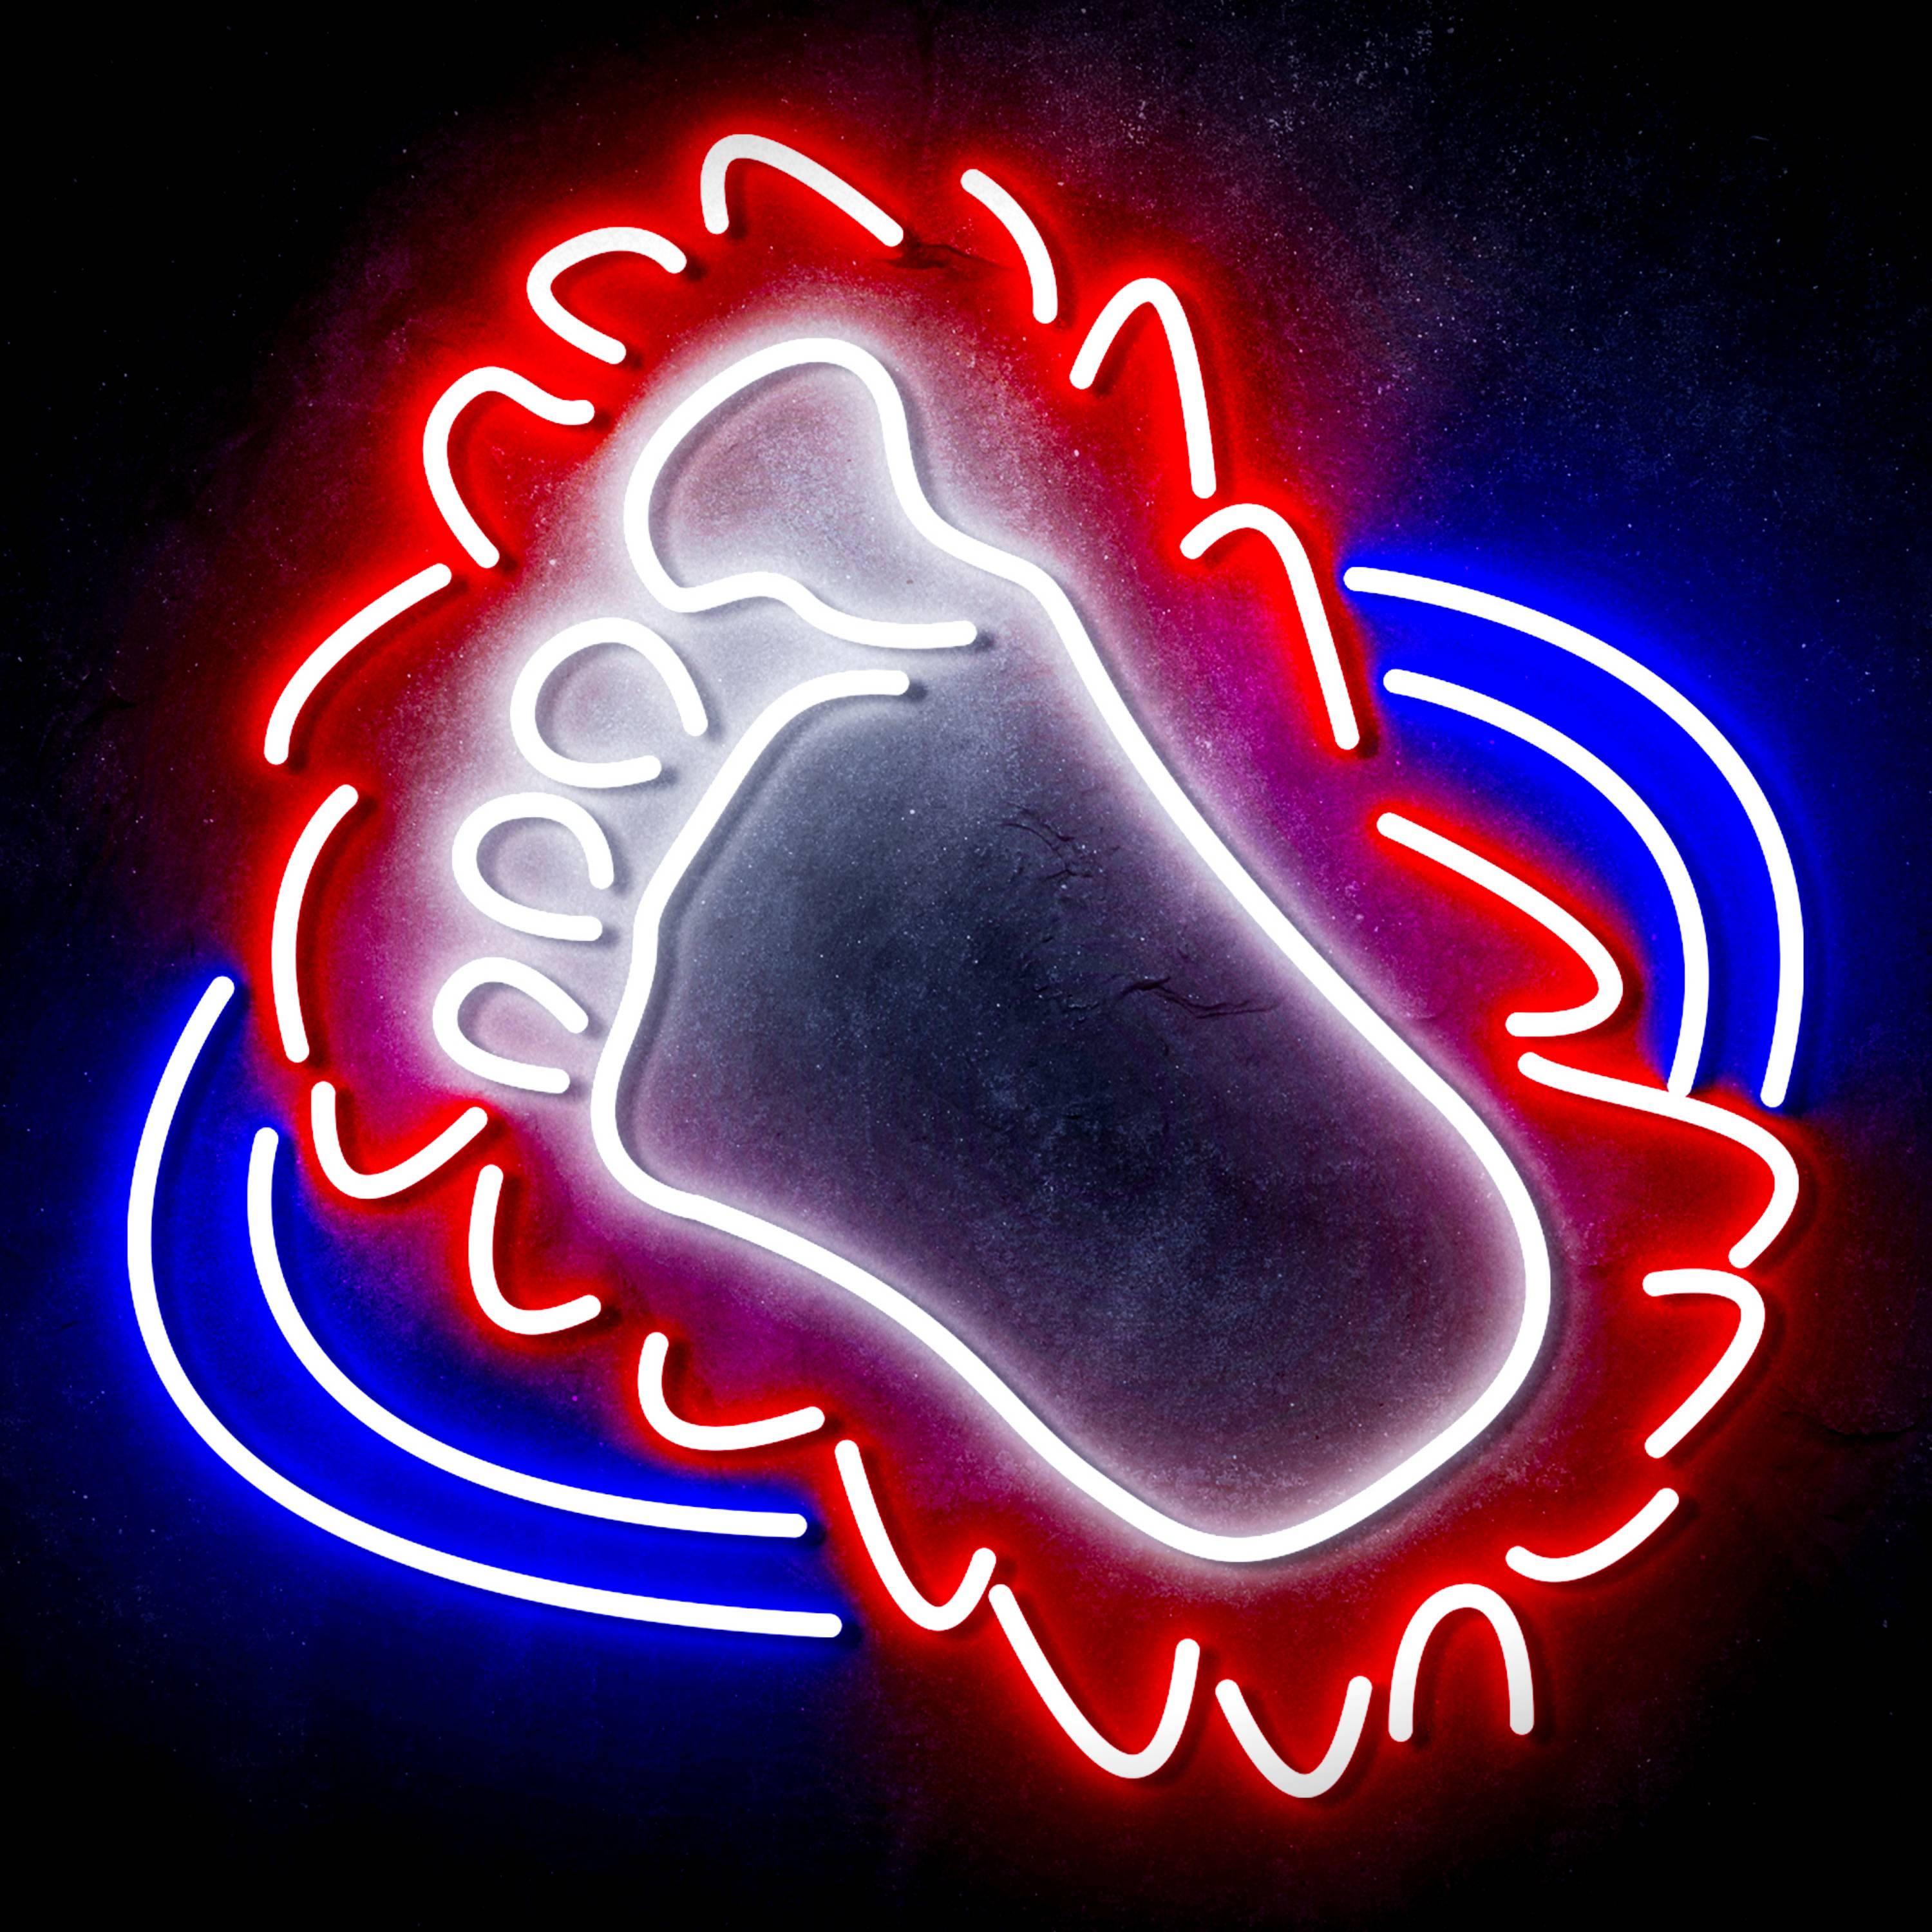 NHL Colorado Avalanche LED Neon Sign